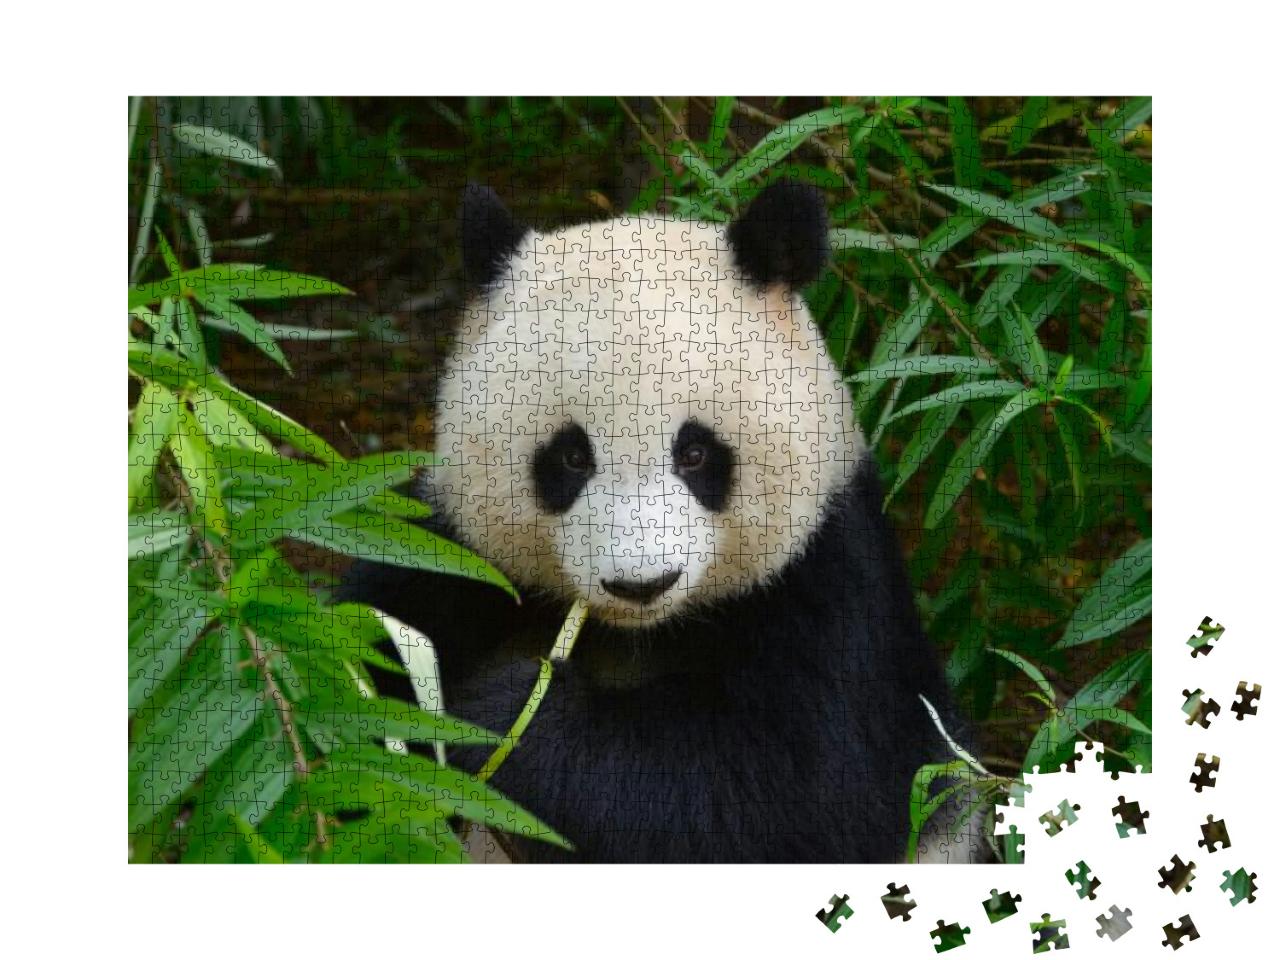 Hungry Giant Panda Bear Eating Bamboo At Chengdu, China... Jigsaw Puzzle with 1000 pieces